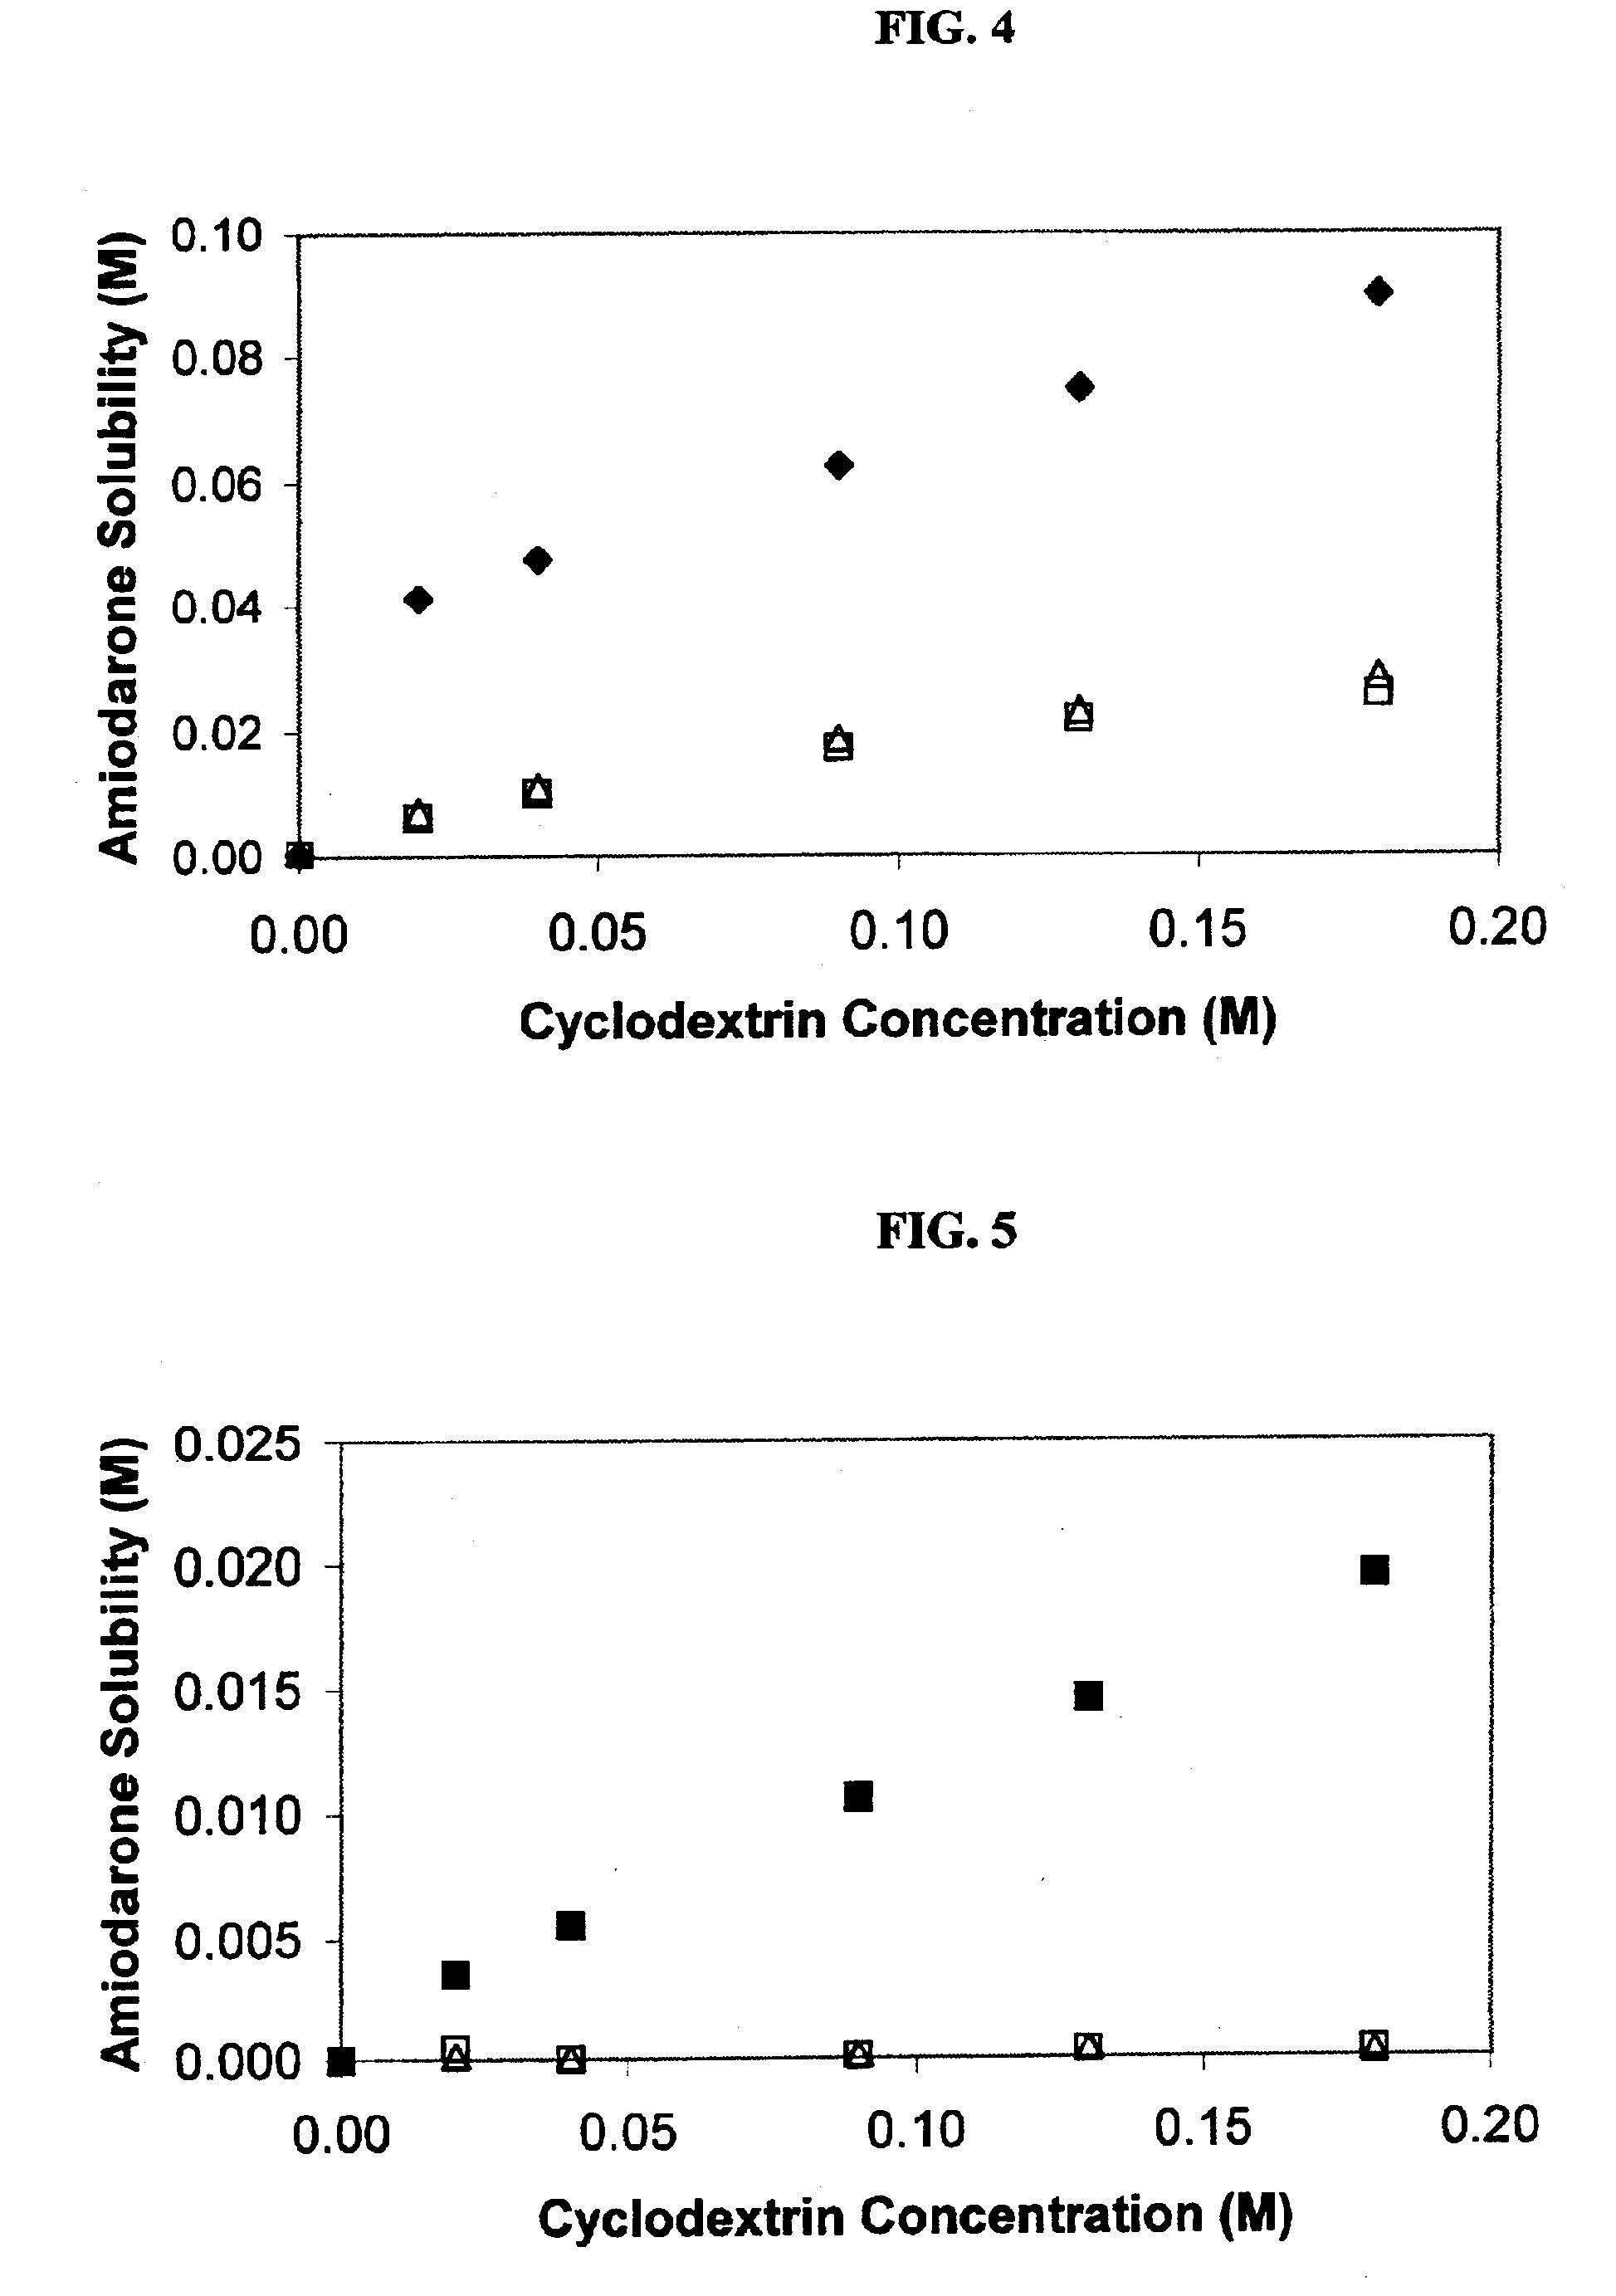 Formulations containing amiodarone and sulfoalkyl ether cyclodextrin